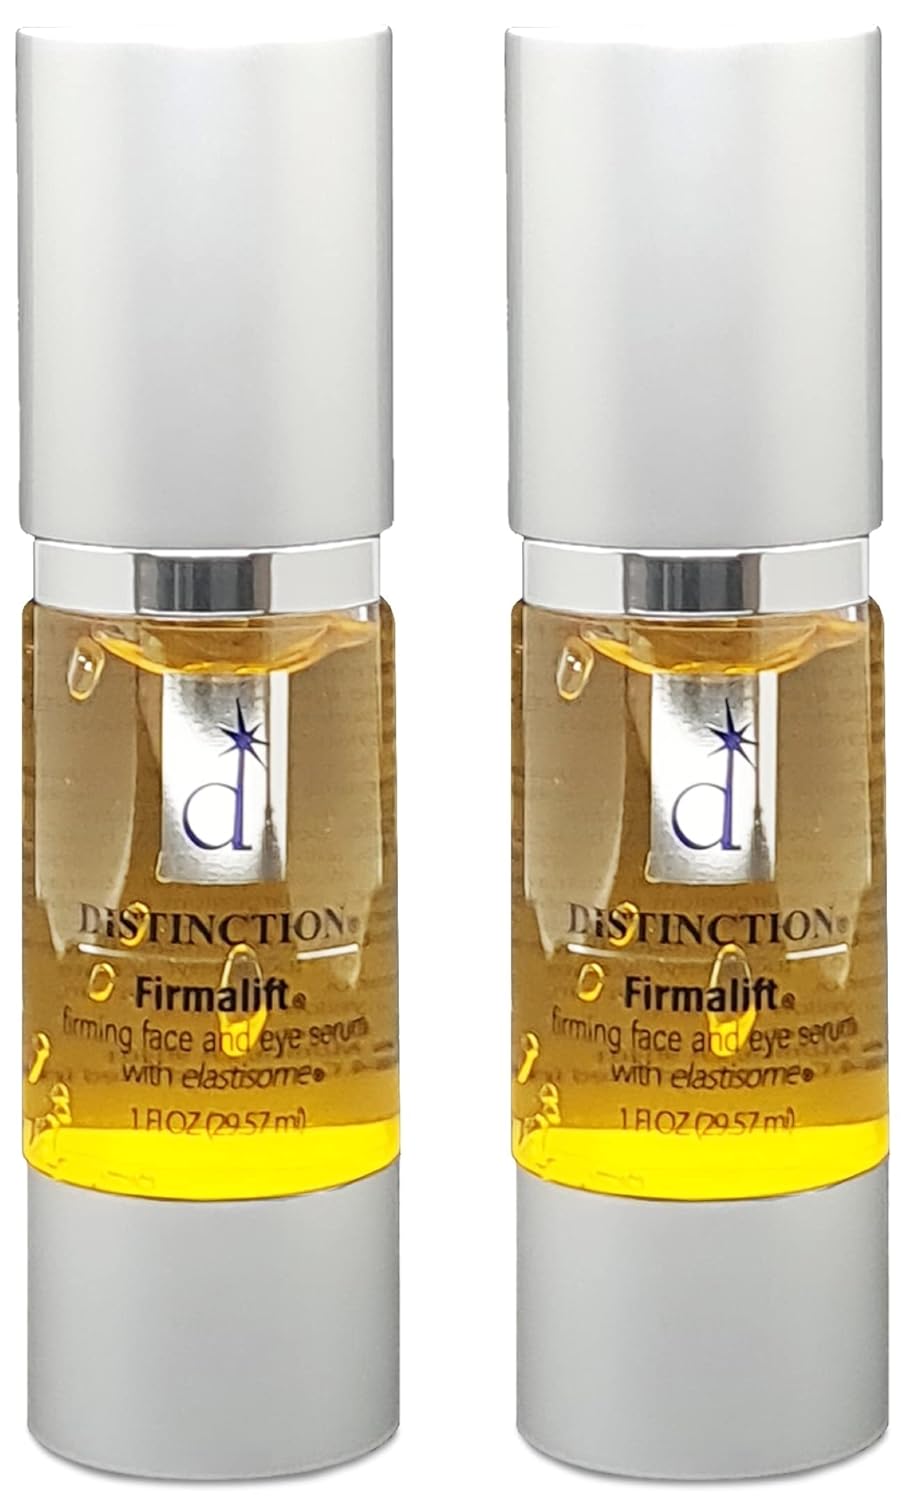 Distinction Firmalift Firming Face & Eye Serum – Anti Aging Serum Lotion Cream and Moisturizer | Helps Reduce the Appearance of Fine Lines and Wrinkles, Soothes (1  , 2 Pack)